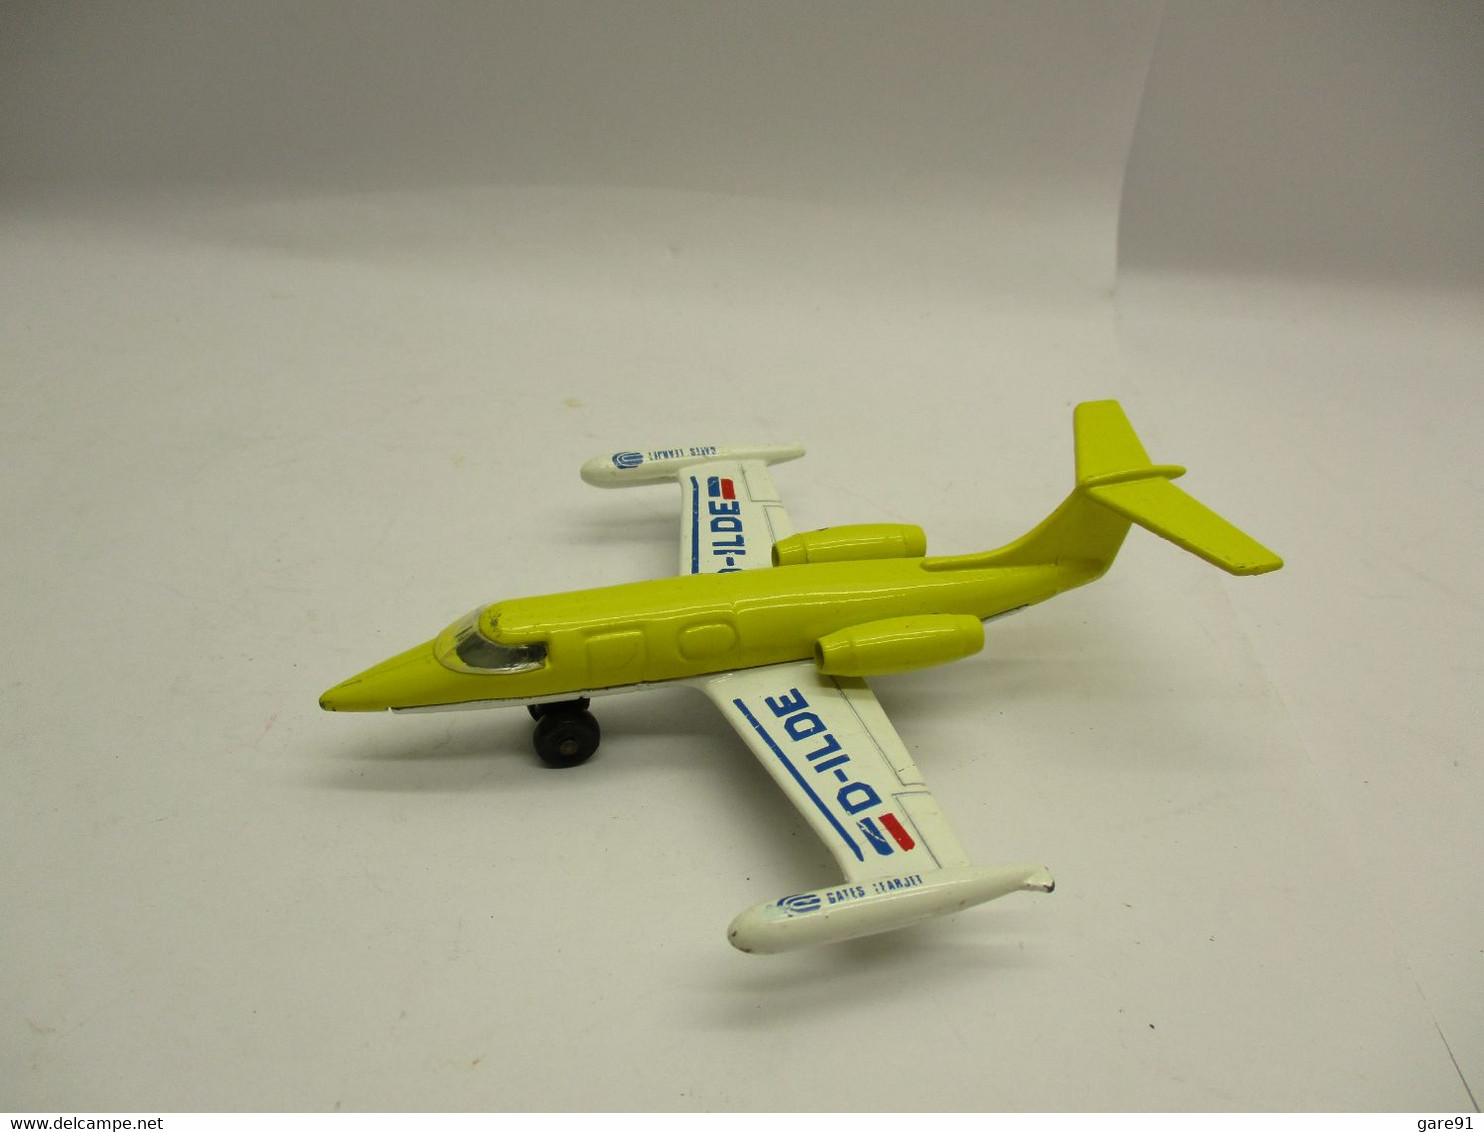 Matchbox Learjet - Airplanes & Helicopters